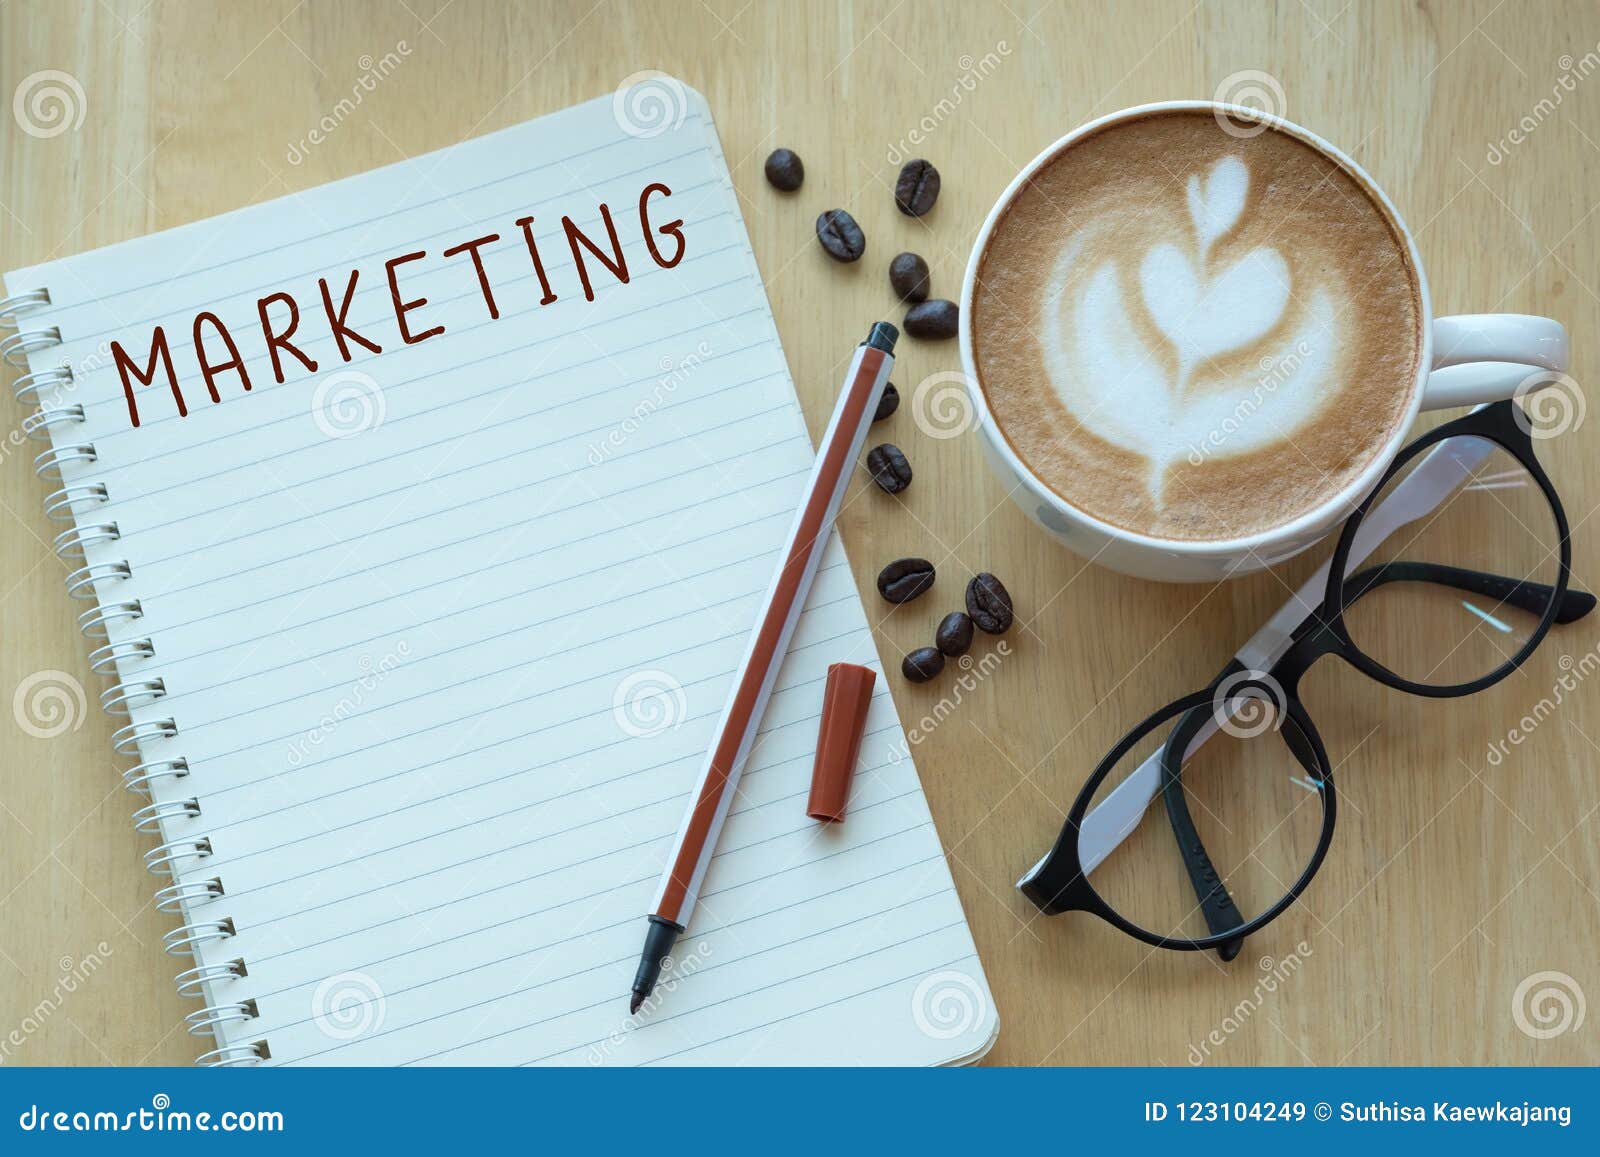 marketing on note book with coffee cup, top viwe on wooden pine